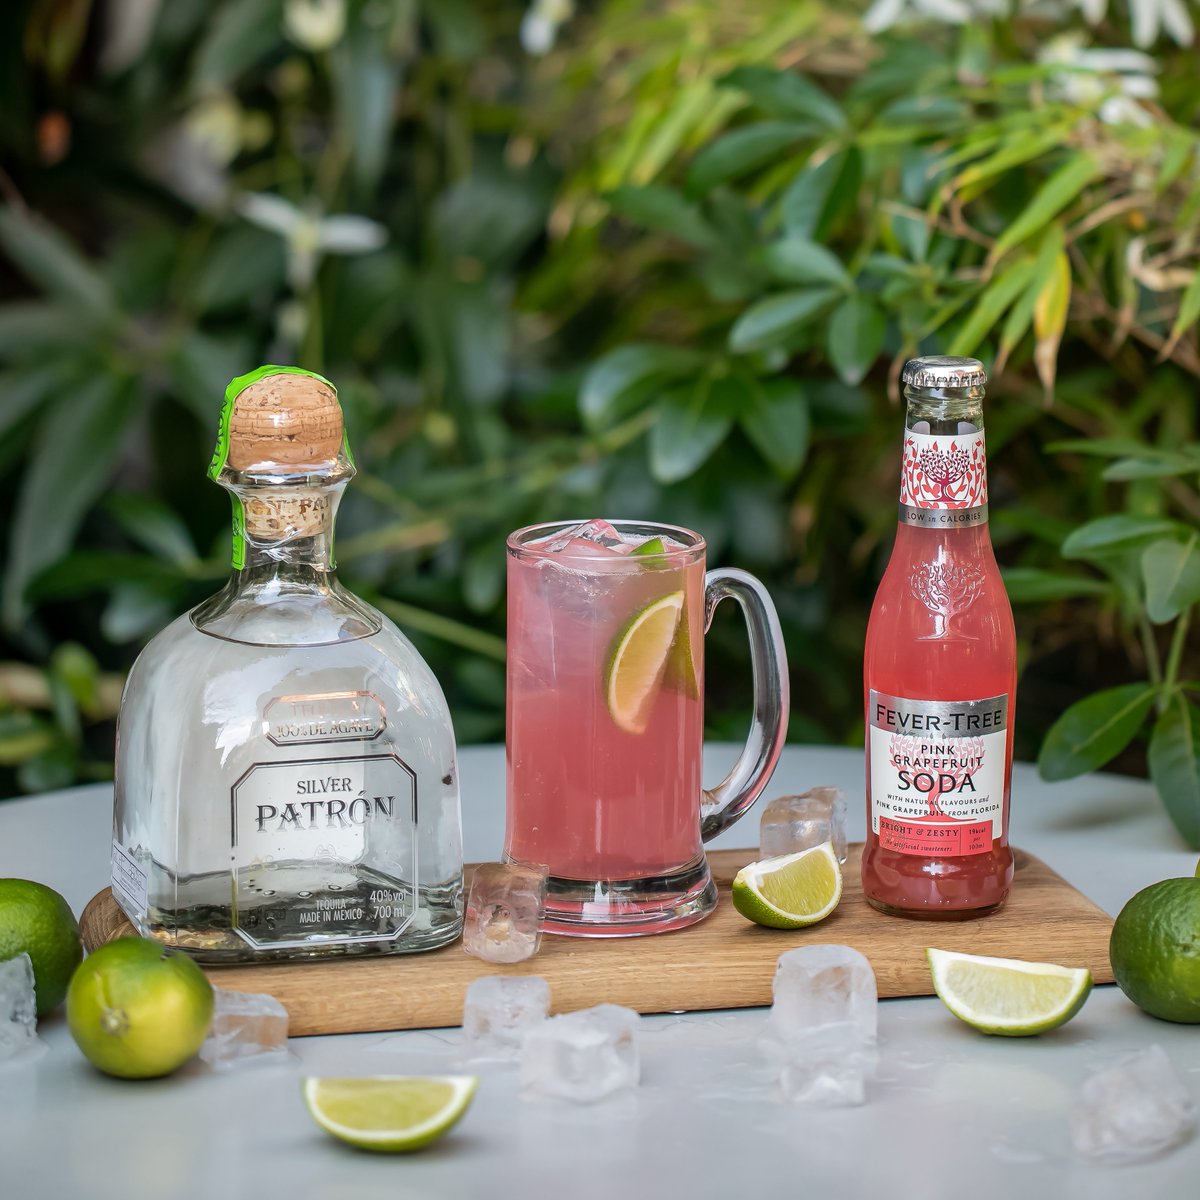 To celebrate the start of Paloma week we're giving you the opportunity to win your very own bottle of @Patron. To #win: 🍹 like, RT, and tag a friend. Must be 18+ and UK resident, winner announced 29/07/22. #competition #palomaweekatyoungs #giveaway #paloma #patron #tequila